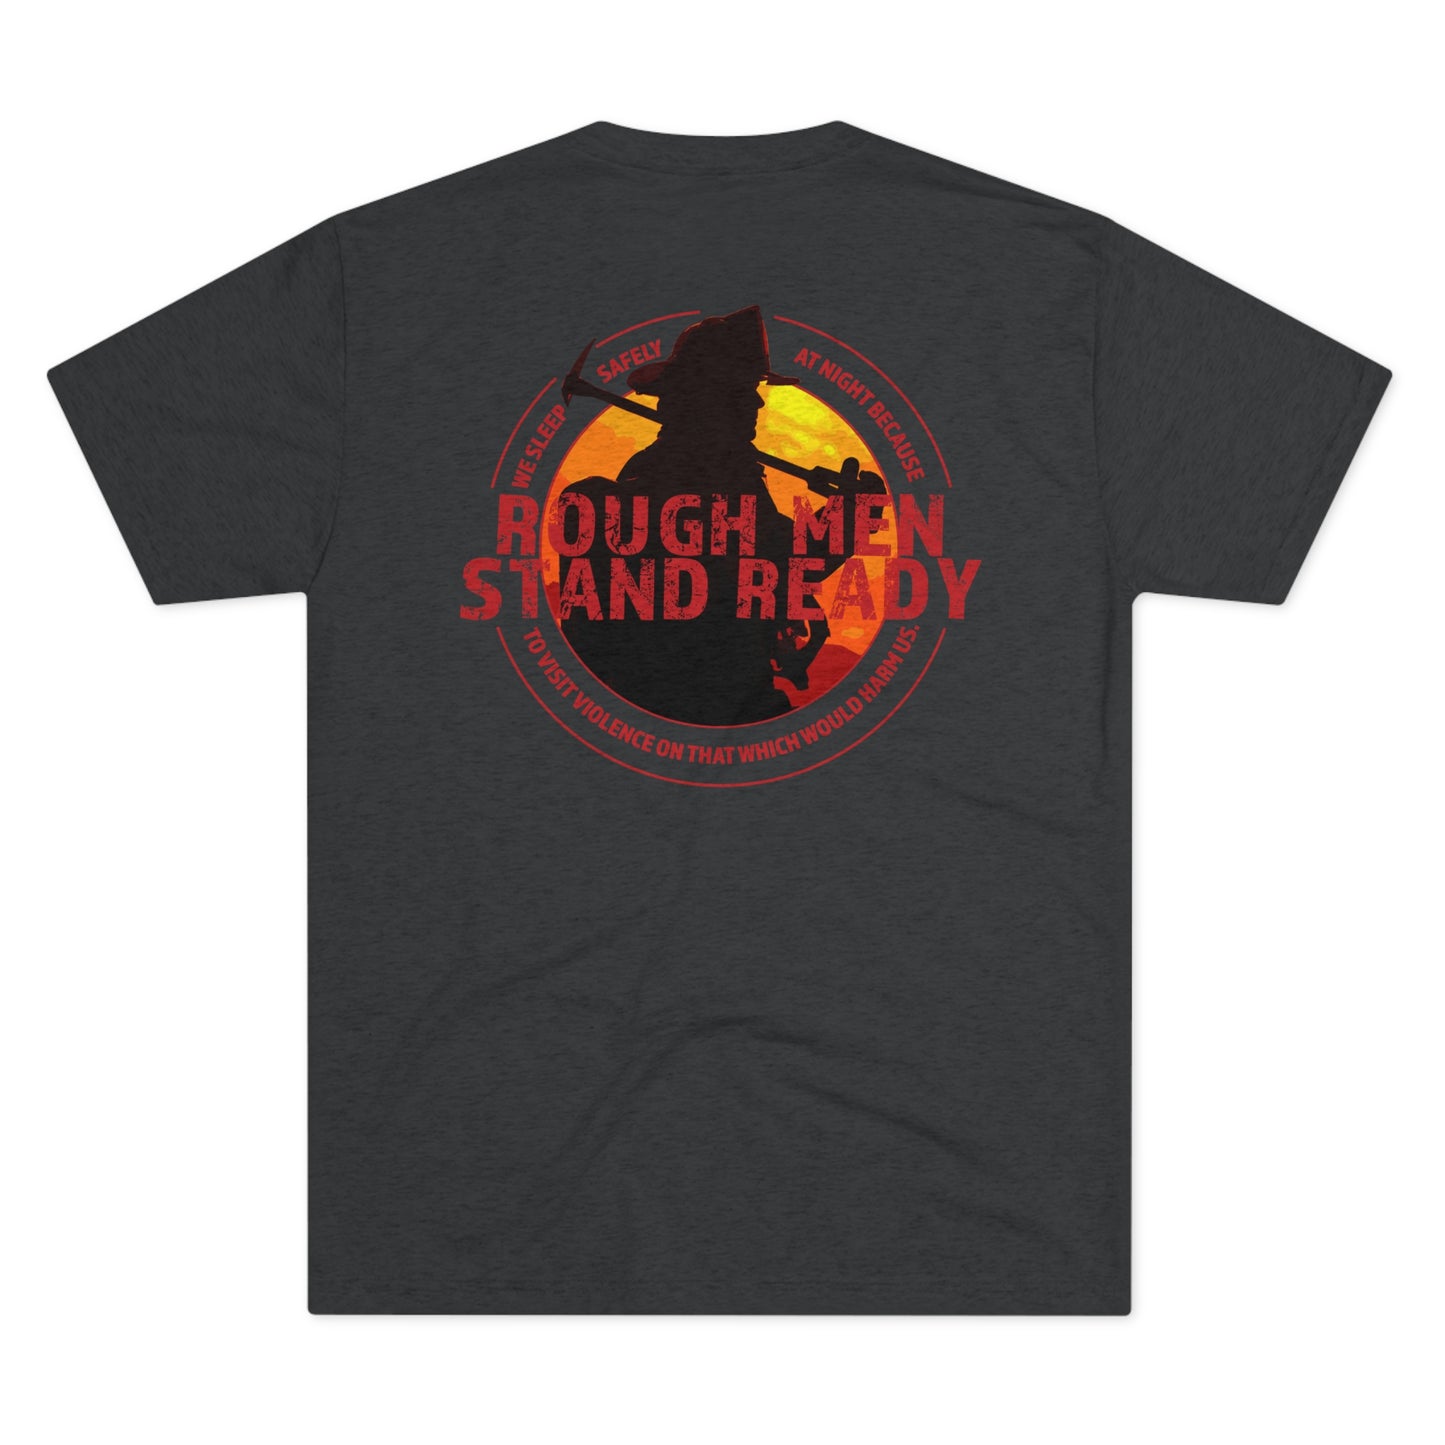 Rough Men Stand Ready—Fireman with Full Quote Triblend Tee